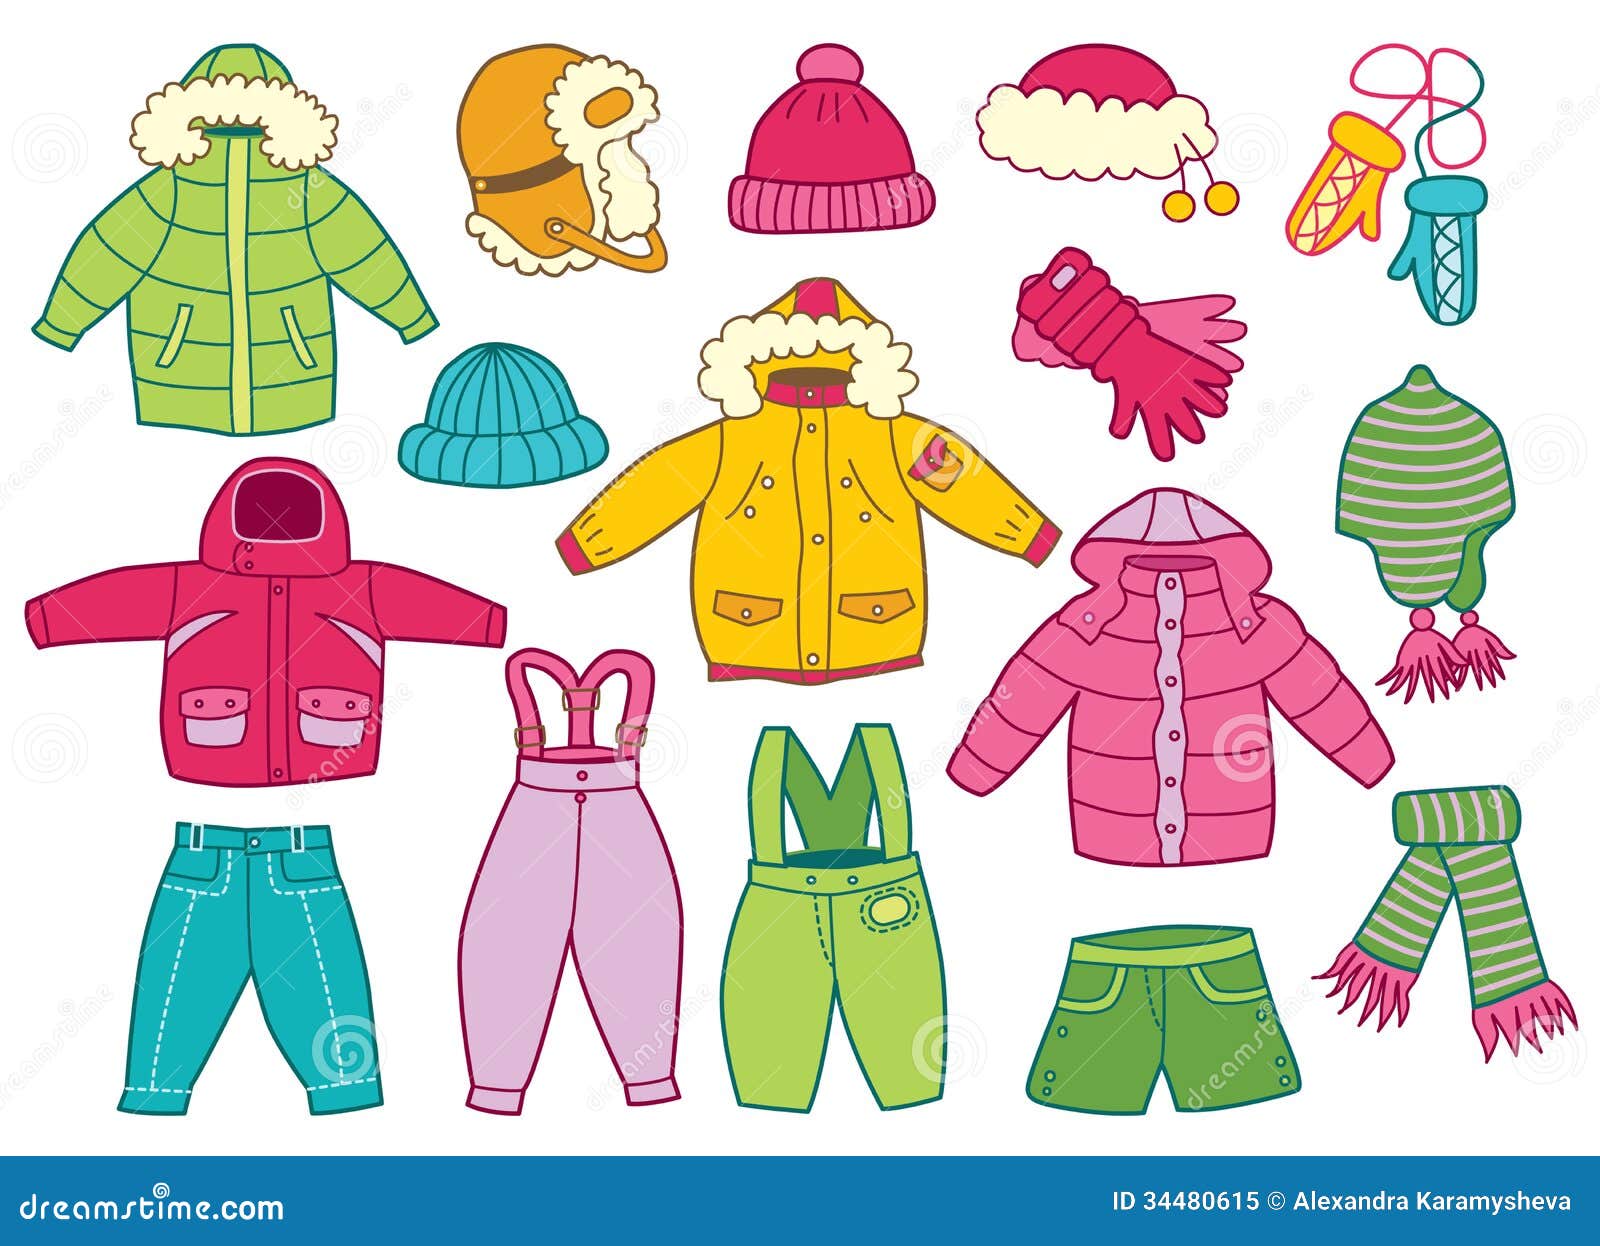 winter clothes clipart images - photo #24